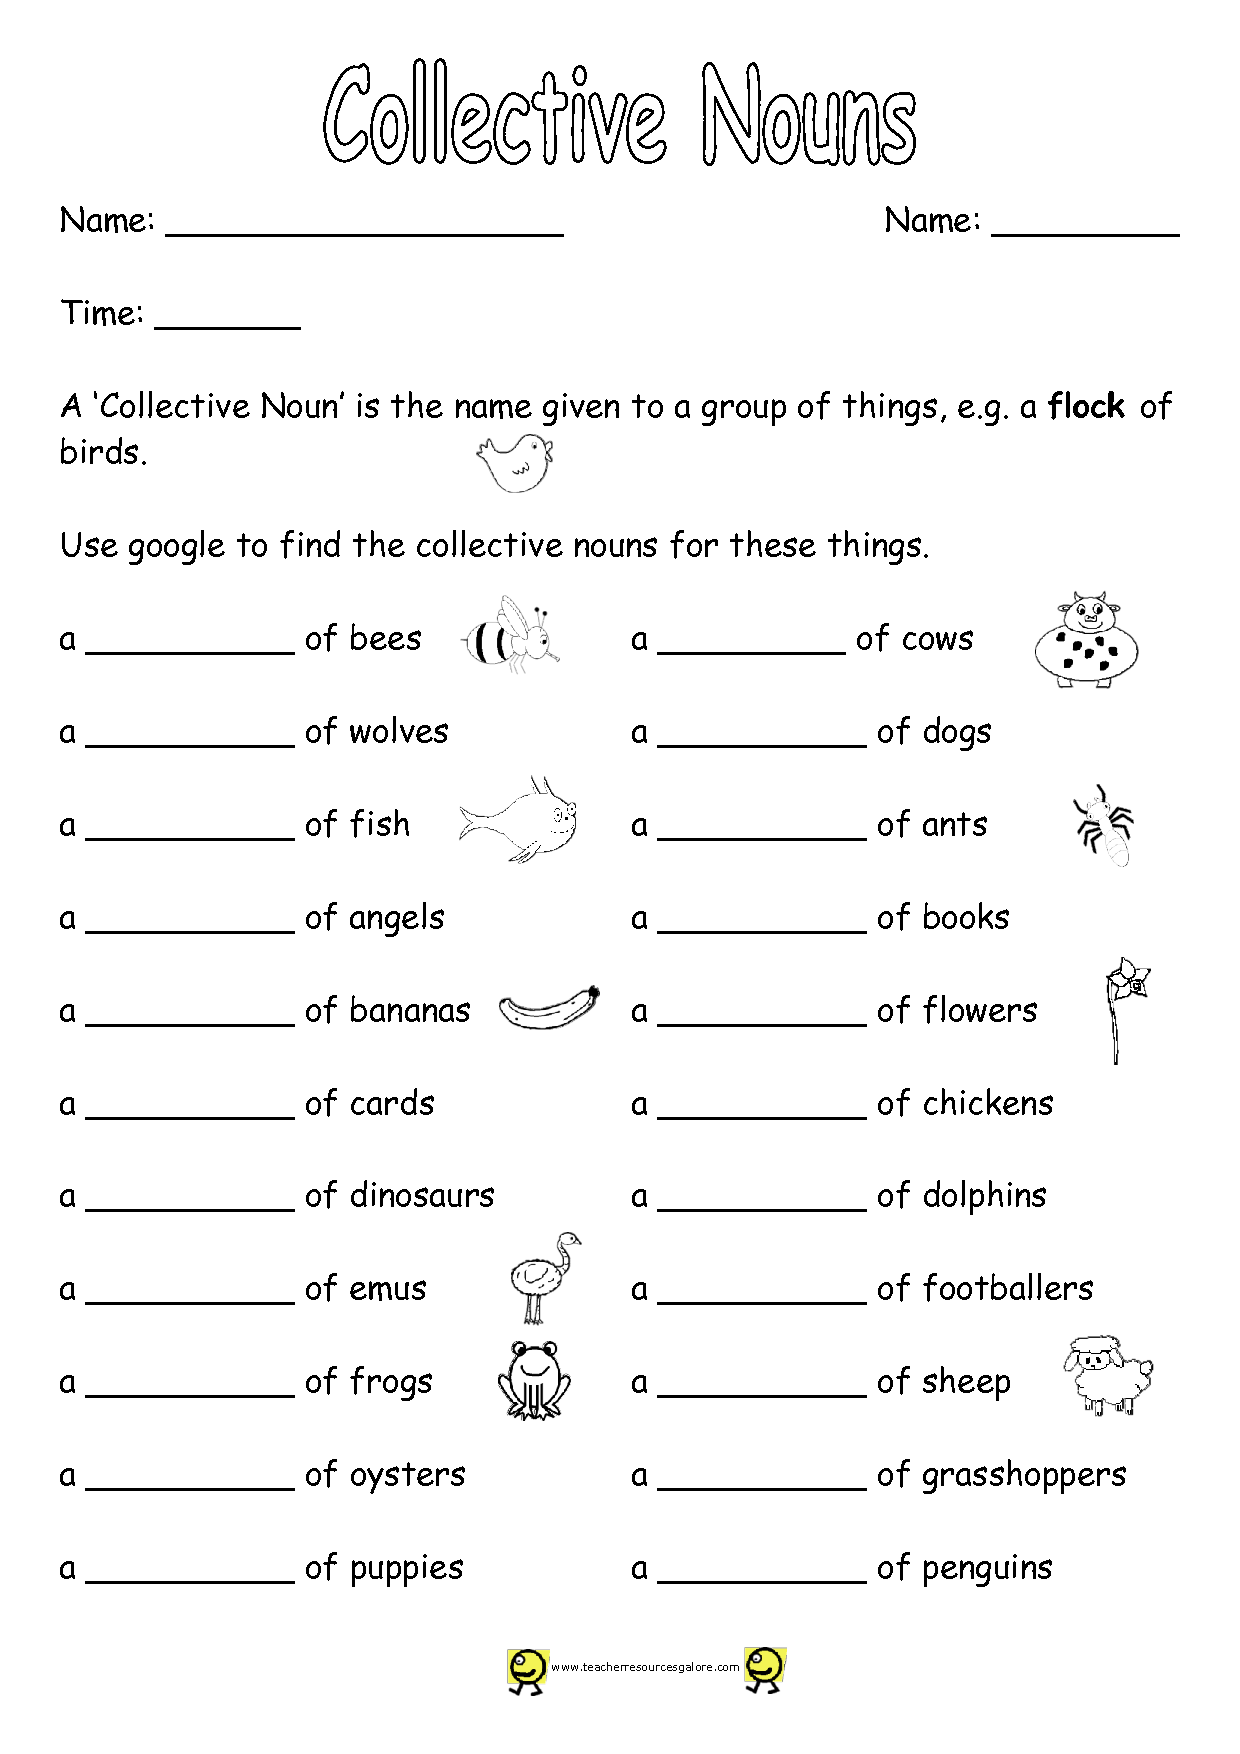 Collective Noun Worksheets For 2nd Grade